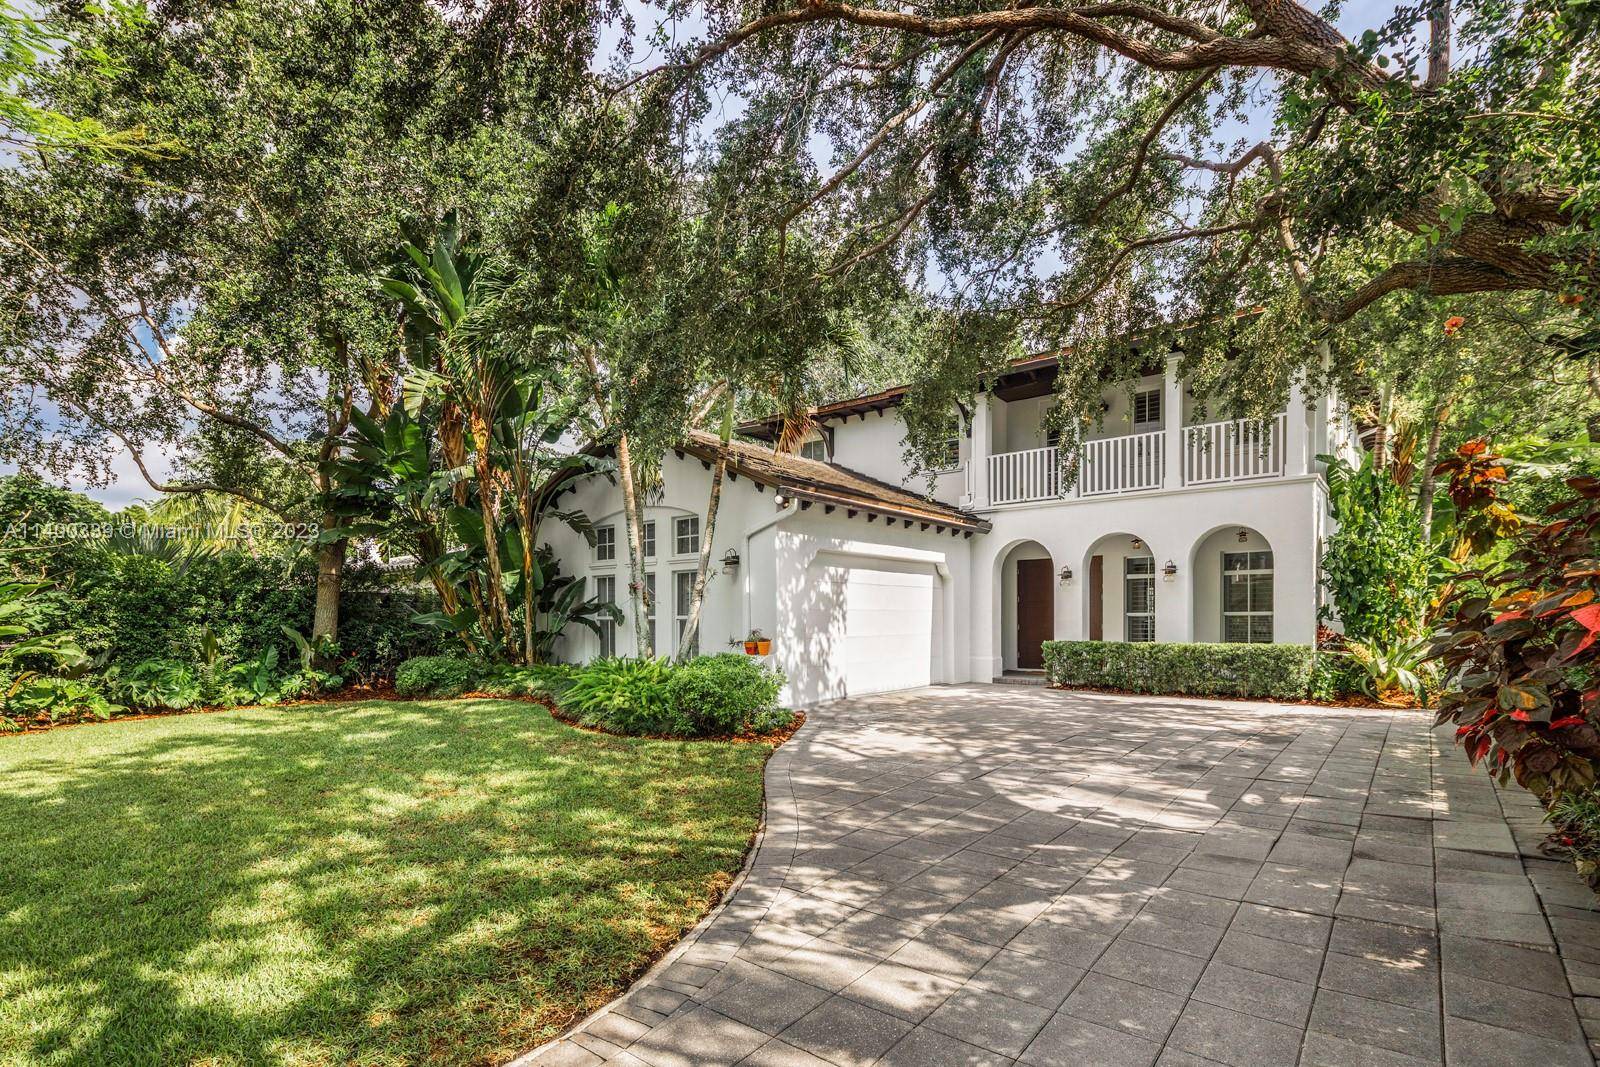 Stunning home on a quiet street in lush South Coconut Grove.